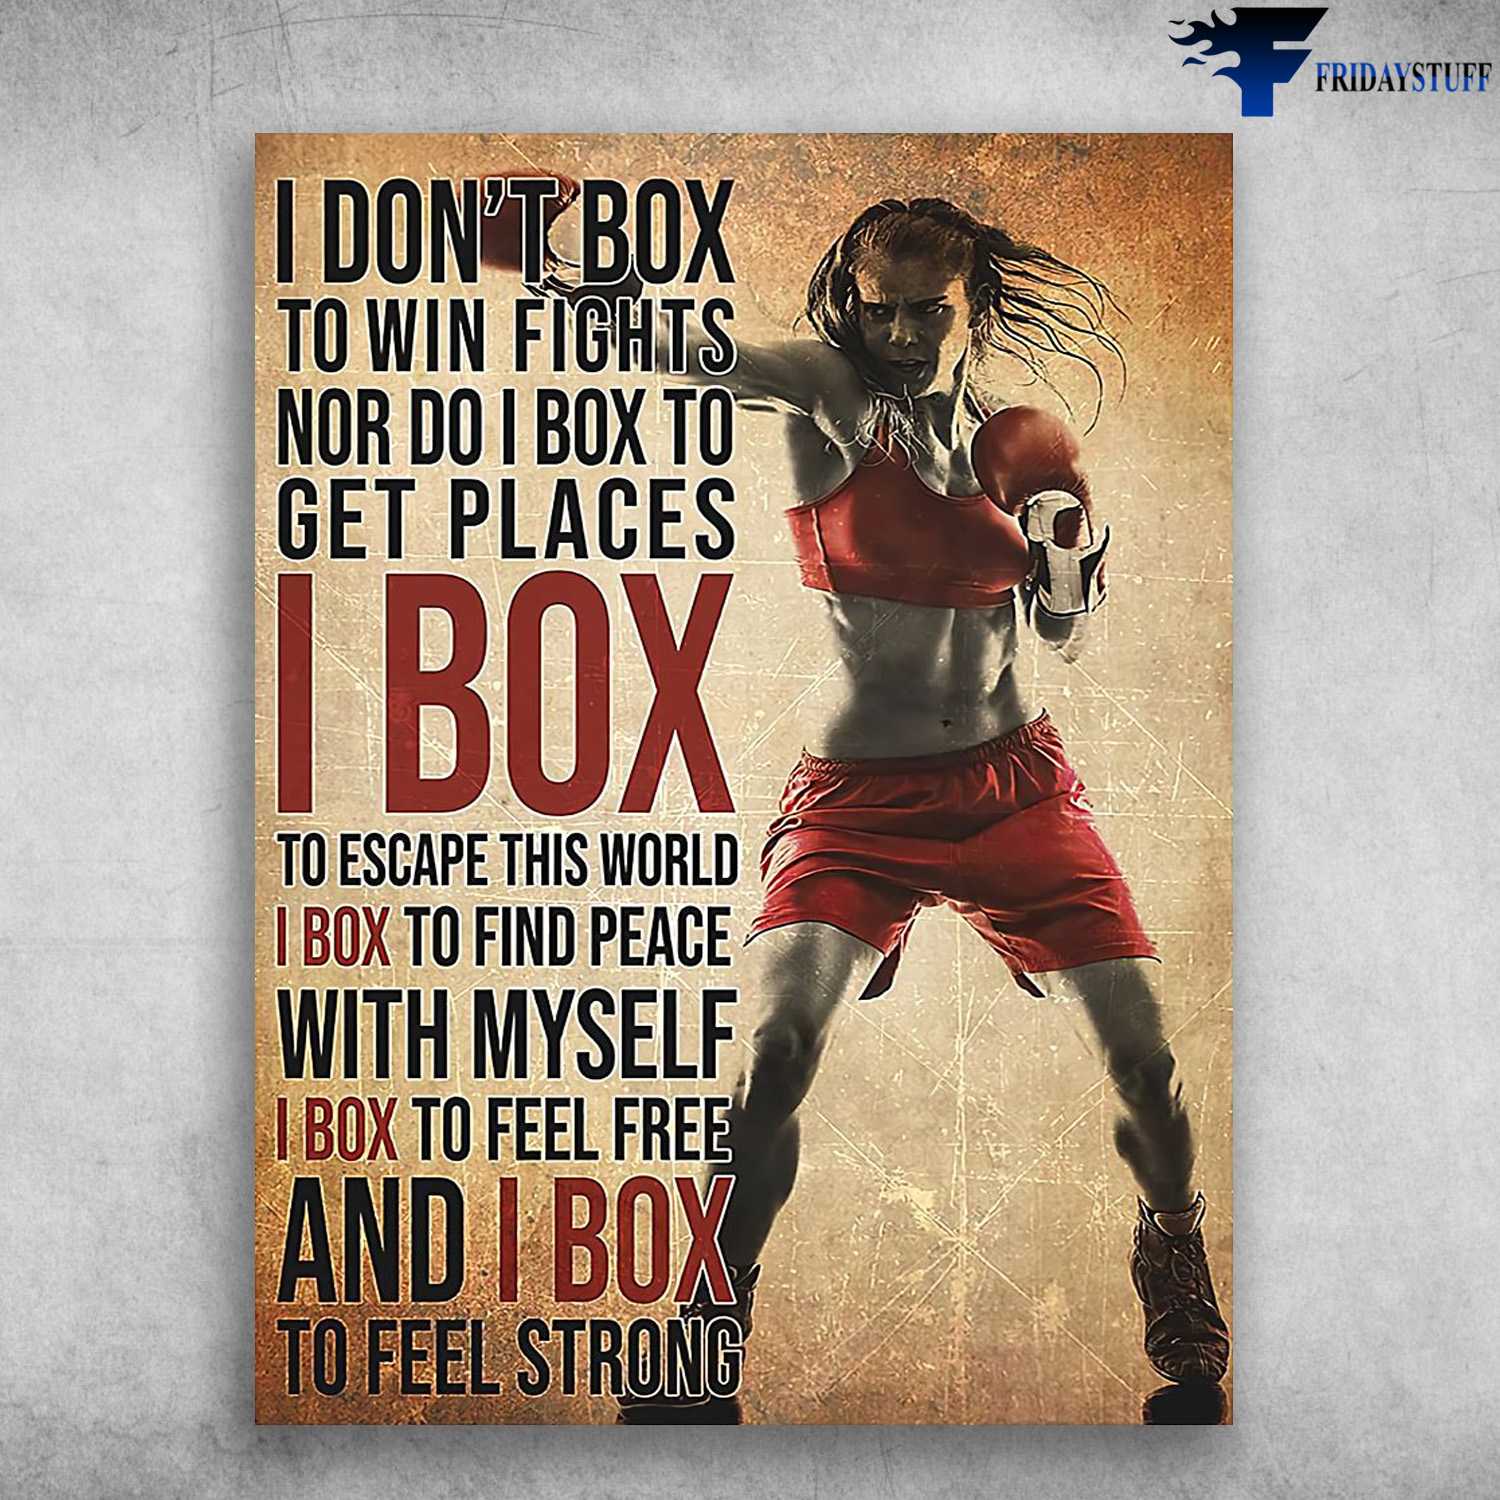 Boxing Girl, Boxing Lover - I Don't Box To Win Fights, Nor Do I Box To Get Places, I Box To Escape This World, I Box To Find Peace, With Myself, I Box To Feel Free, And I Box To Feel Strong